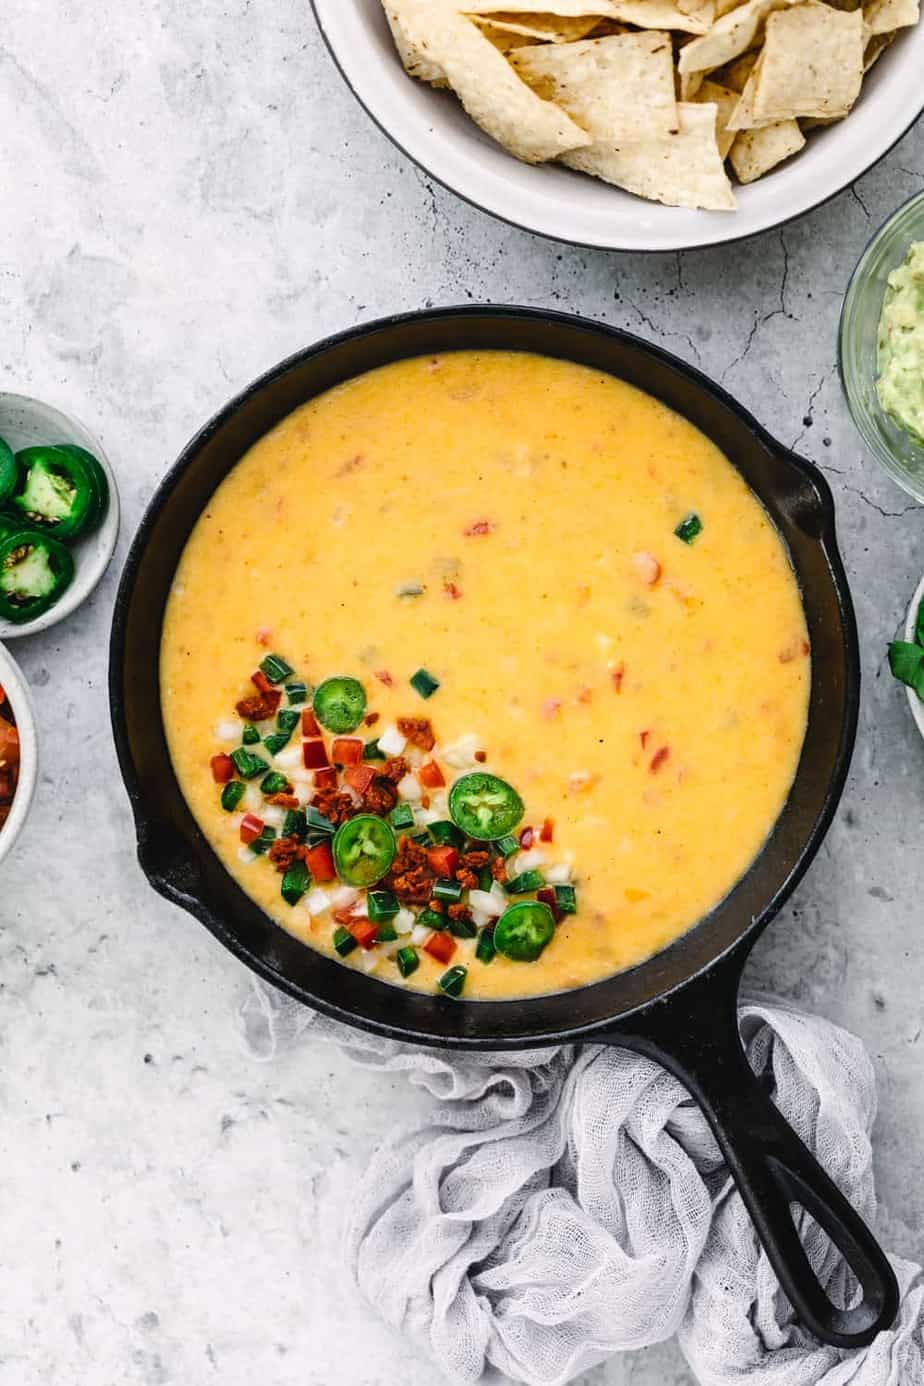 Instant Pot Queso Dip Recipe with Ground Beef, served with Mission Tortilla Strips